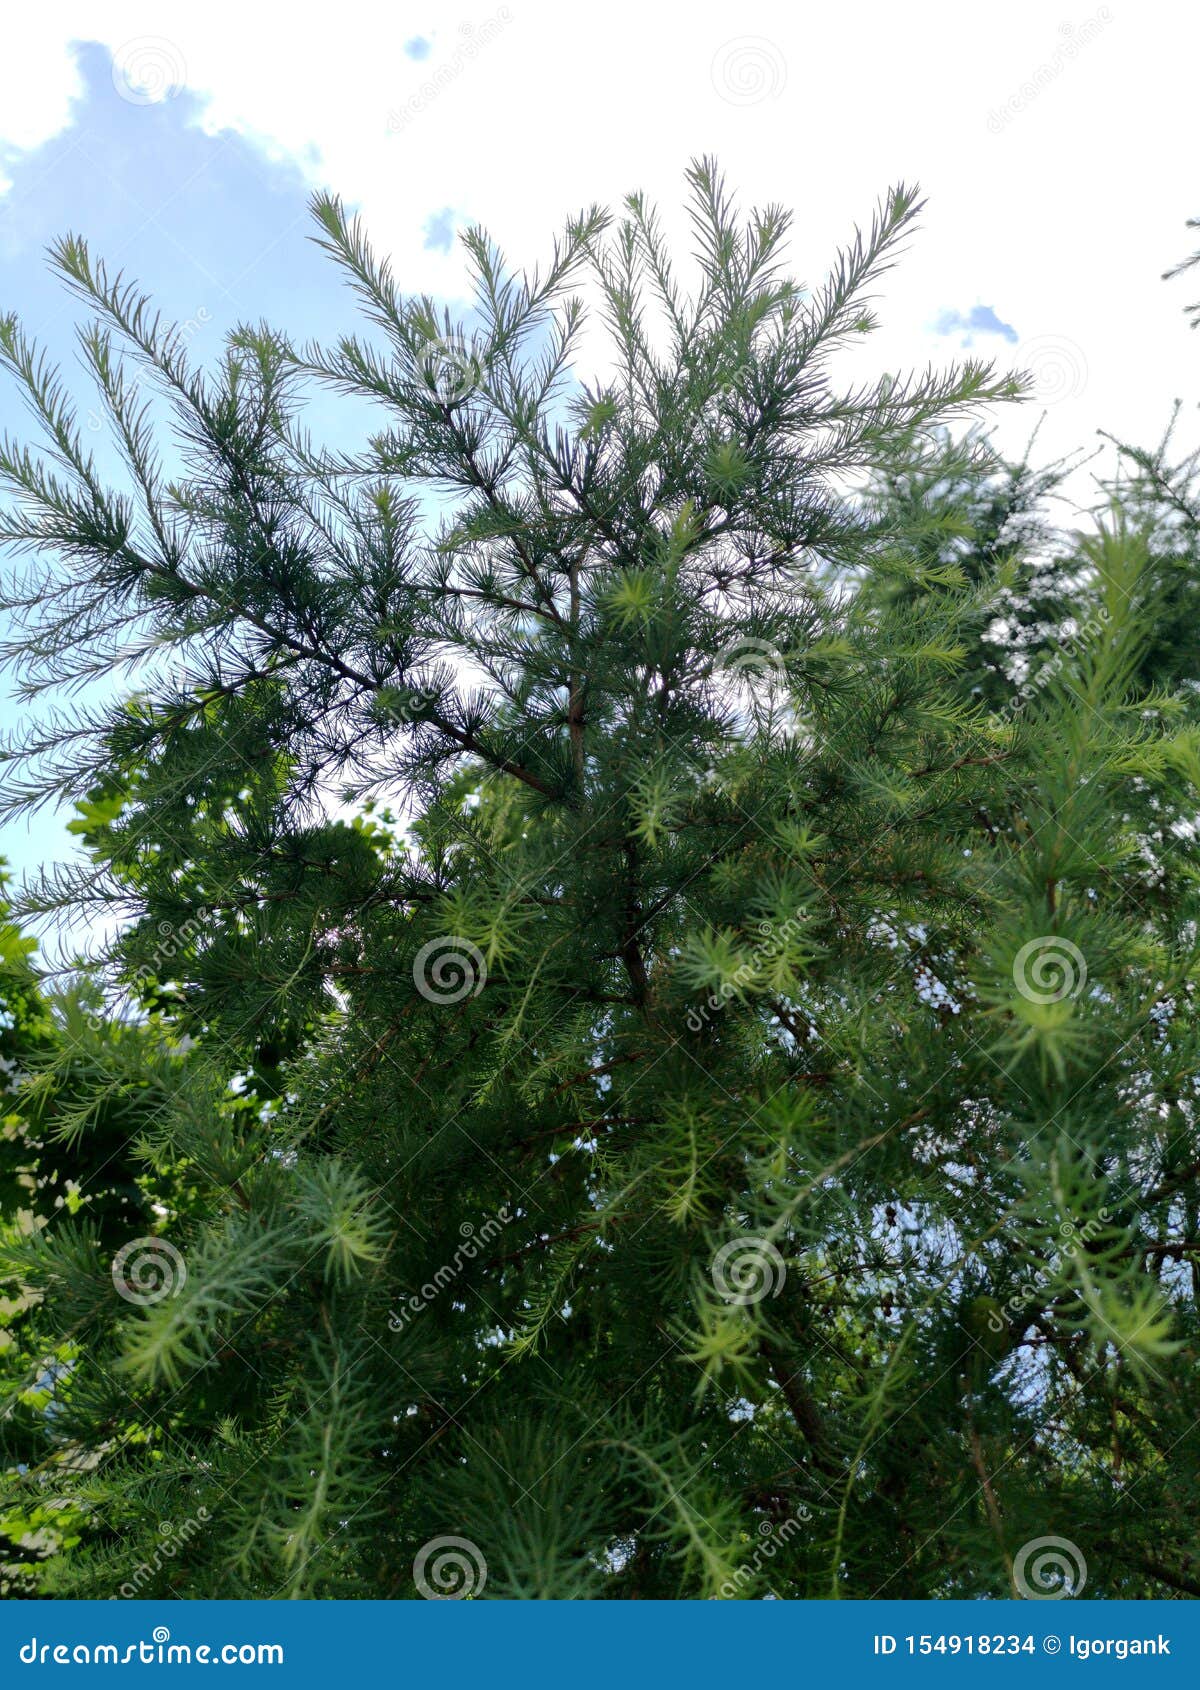 young growing fir trees